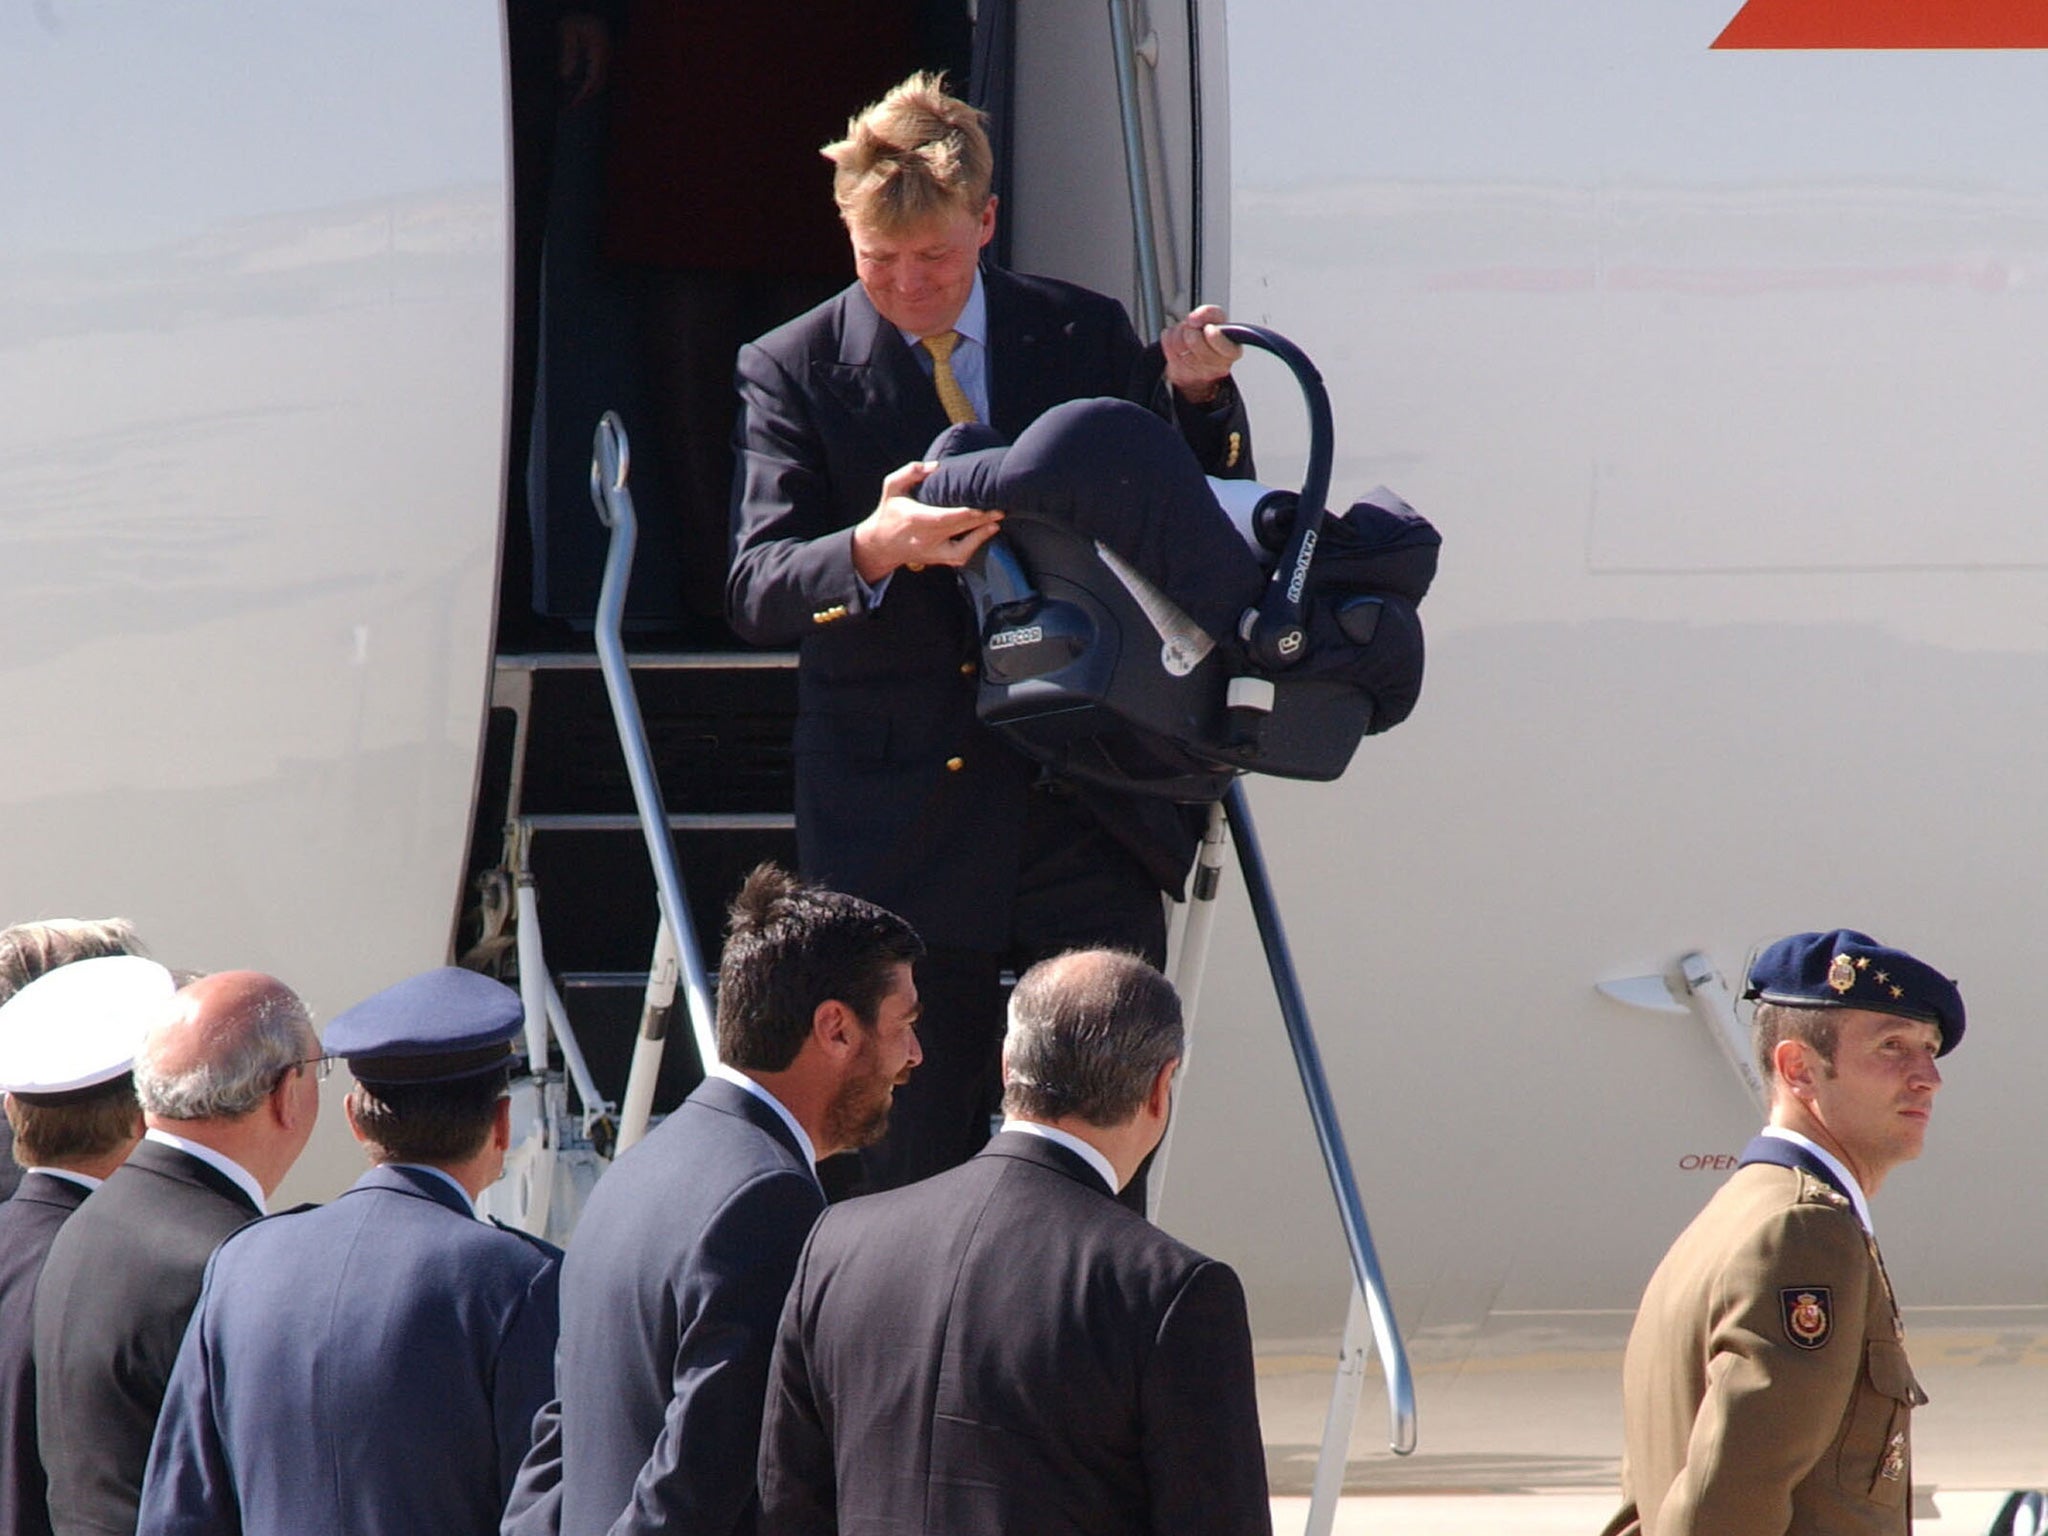 King Willem-Alexander of the Netherlands carries his daughter as he disembarks at Madrid airport